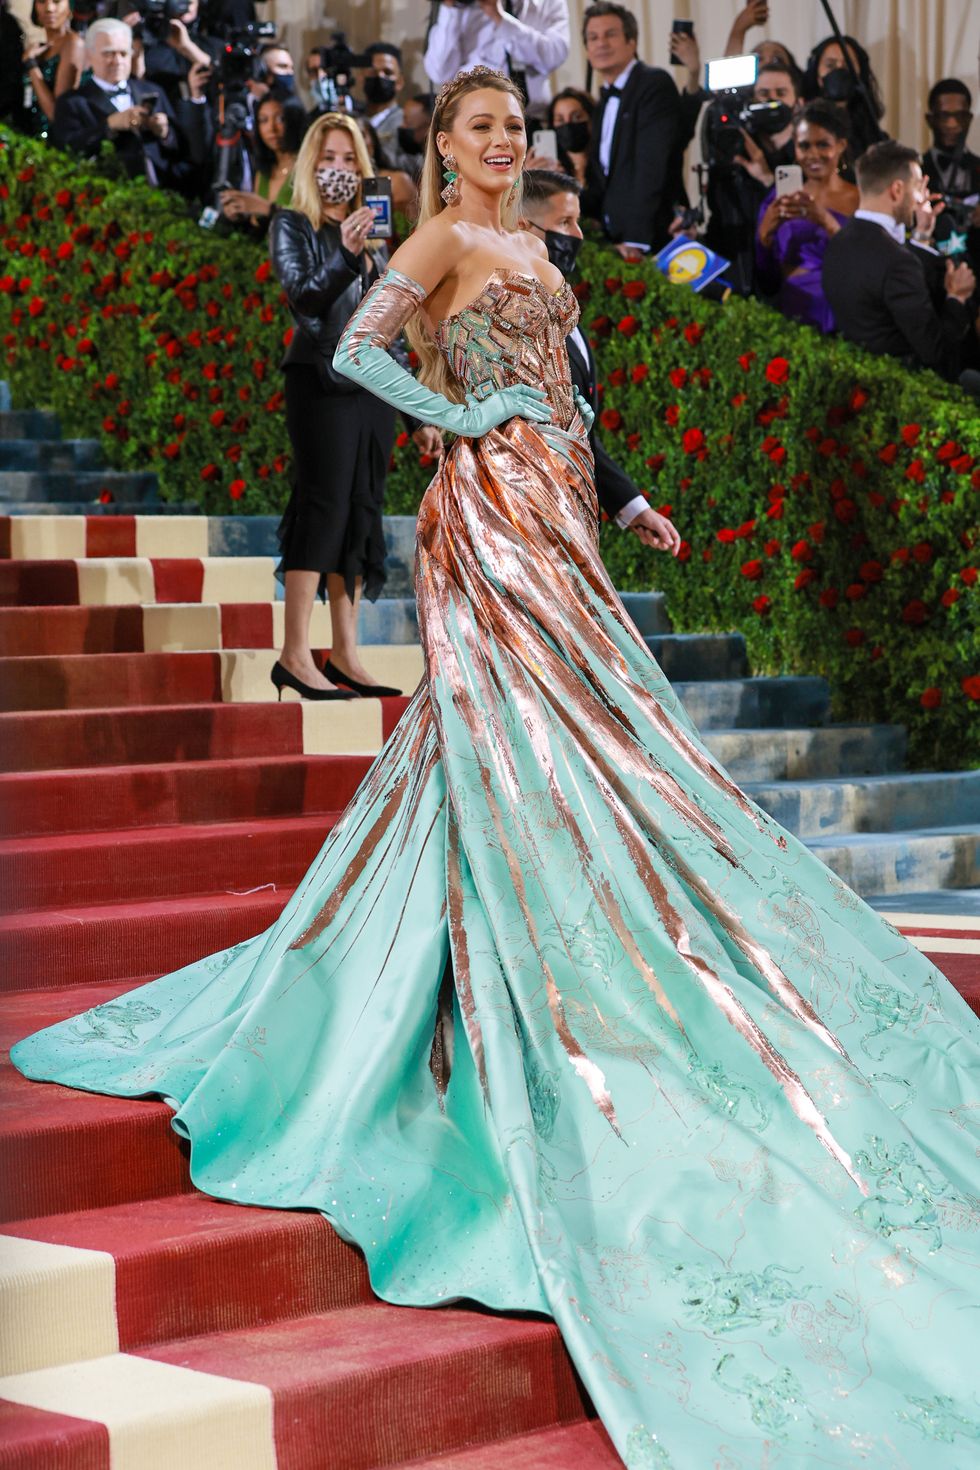 Watch Ryan Reynolds' Cute Reaction to Blake Lively's 2022 Met Gala Moment